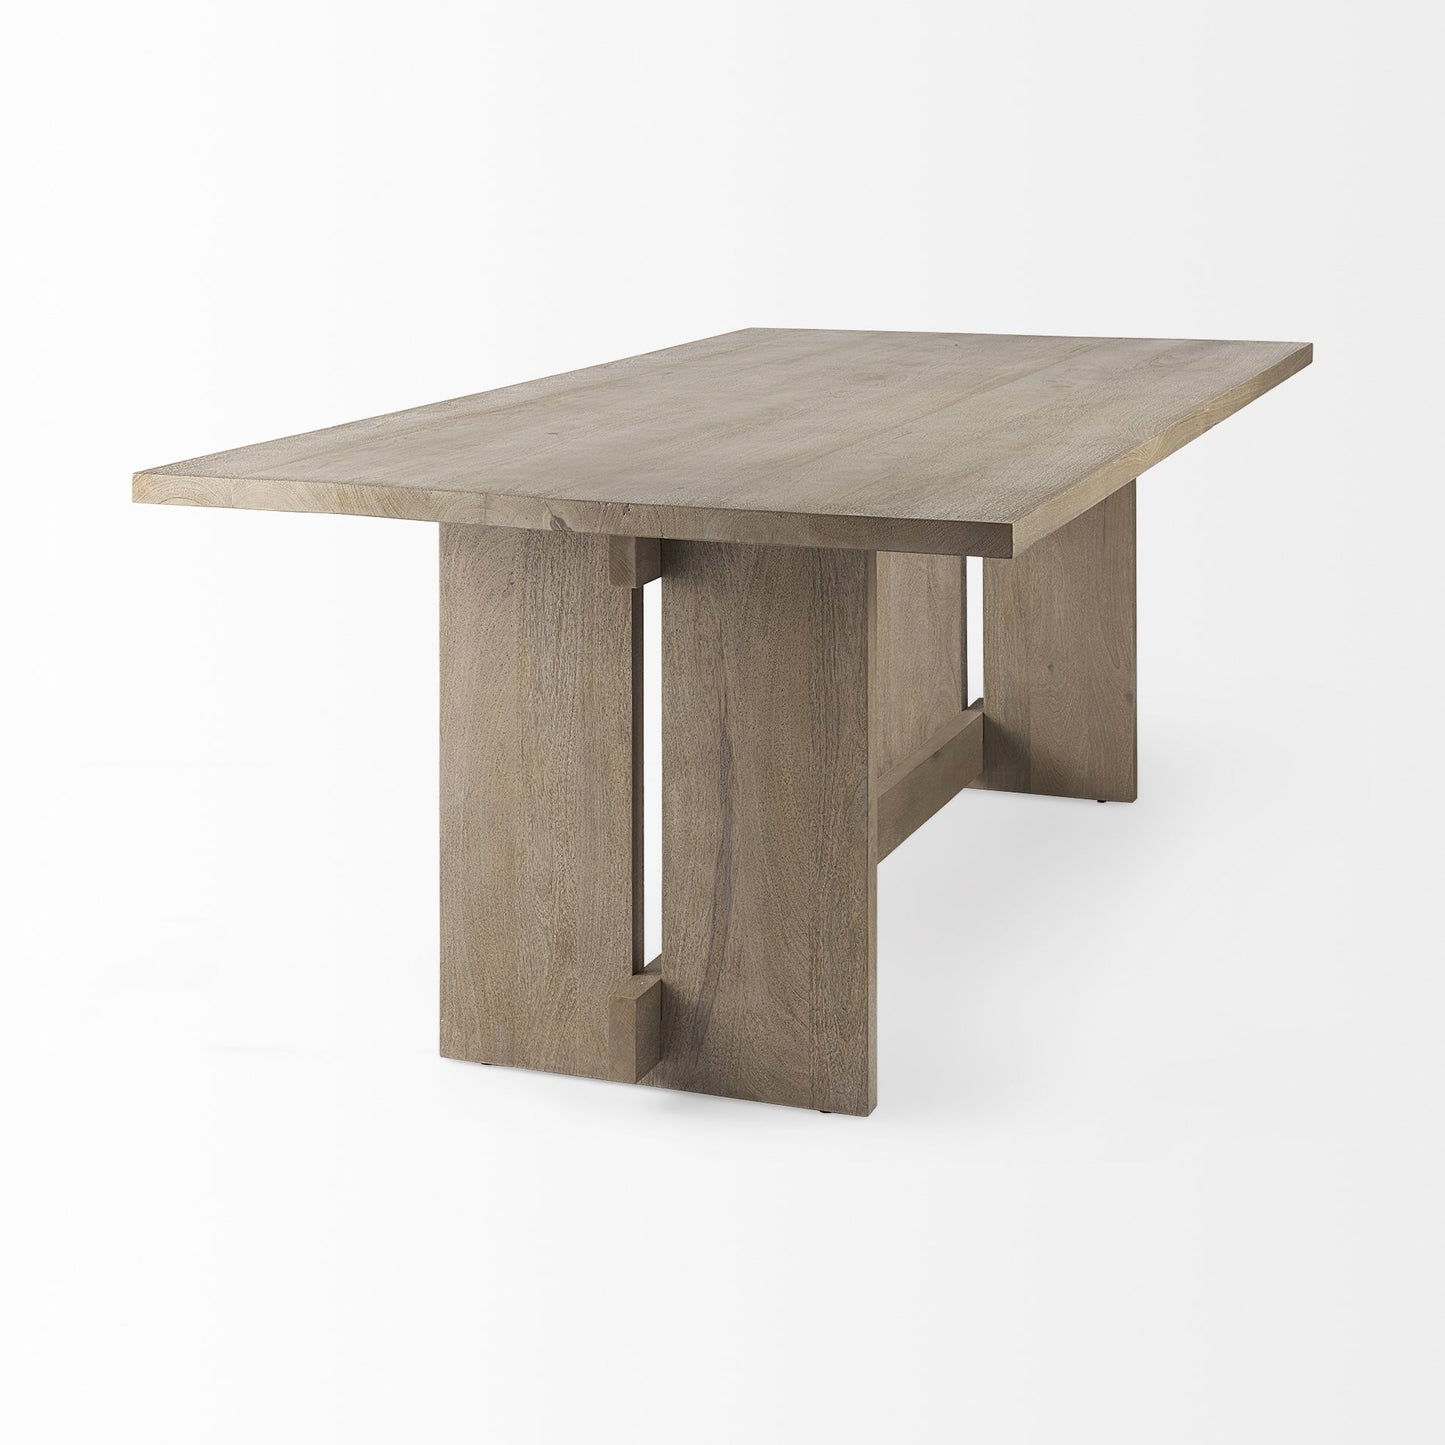 Light Brown Modern Rustic Wooden Dining Table